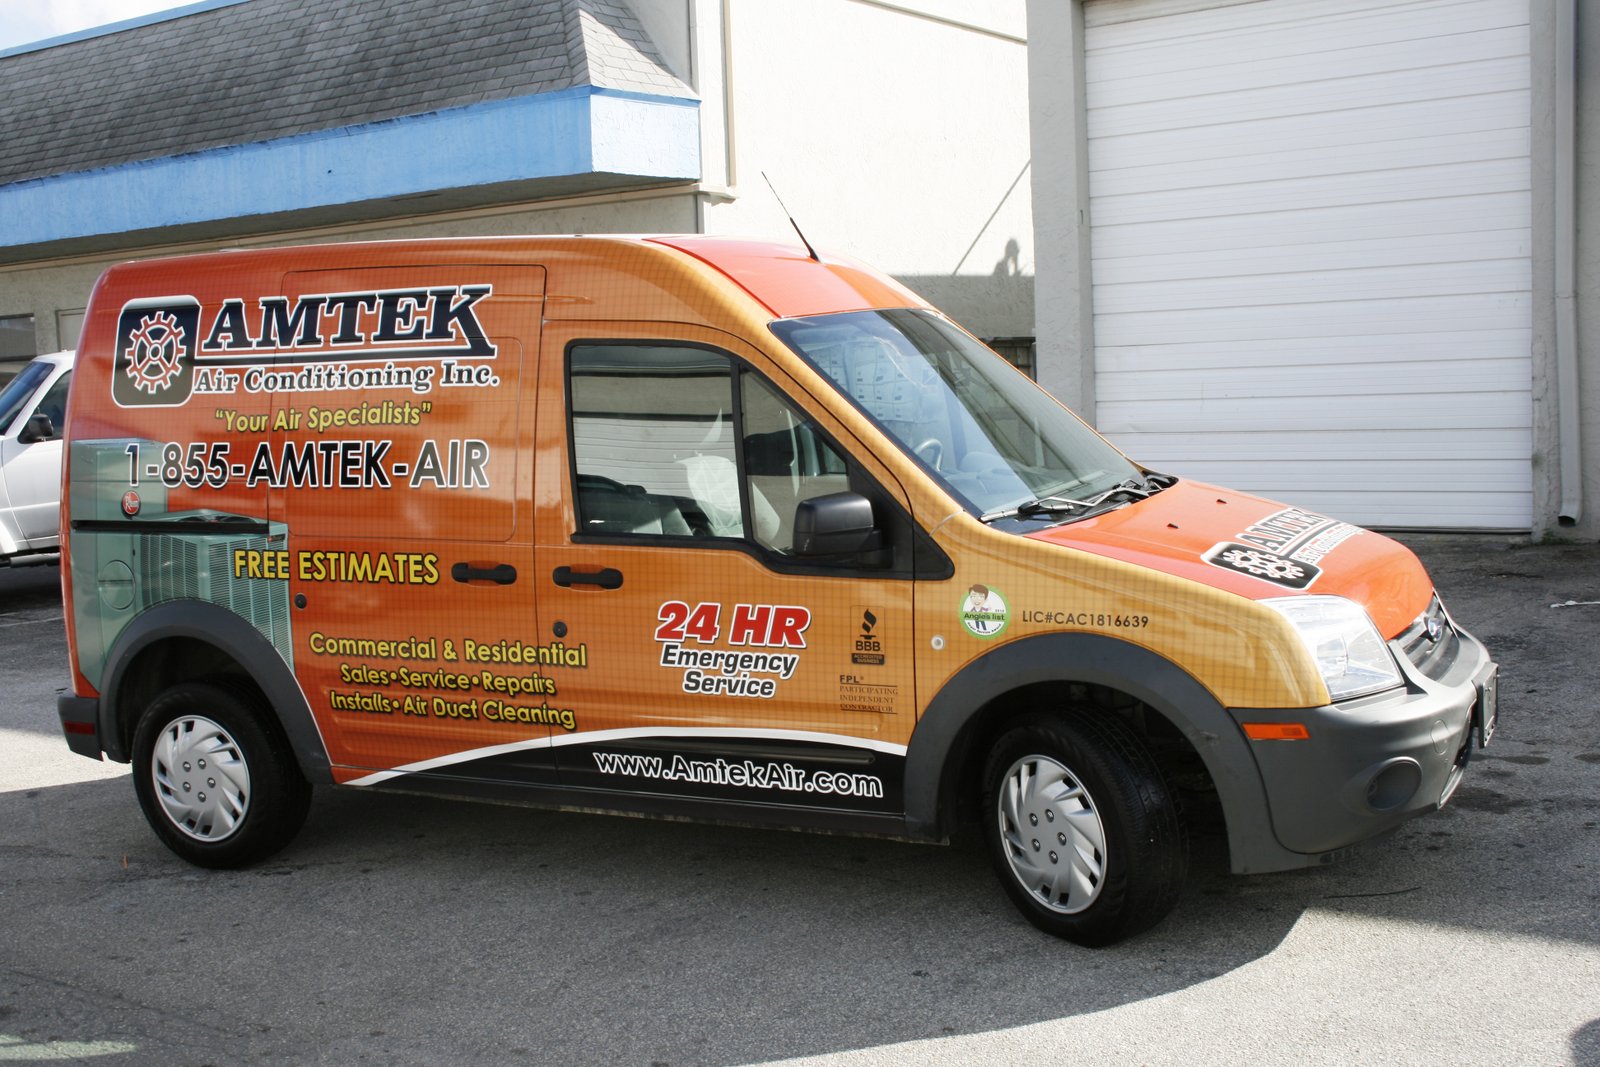 vehicle graphics and wraps - New York City, NYC, Manhattan, The Bronx, Brooklyn, Queens, Staten Island, New York, NY